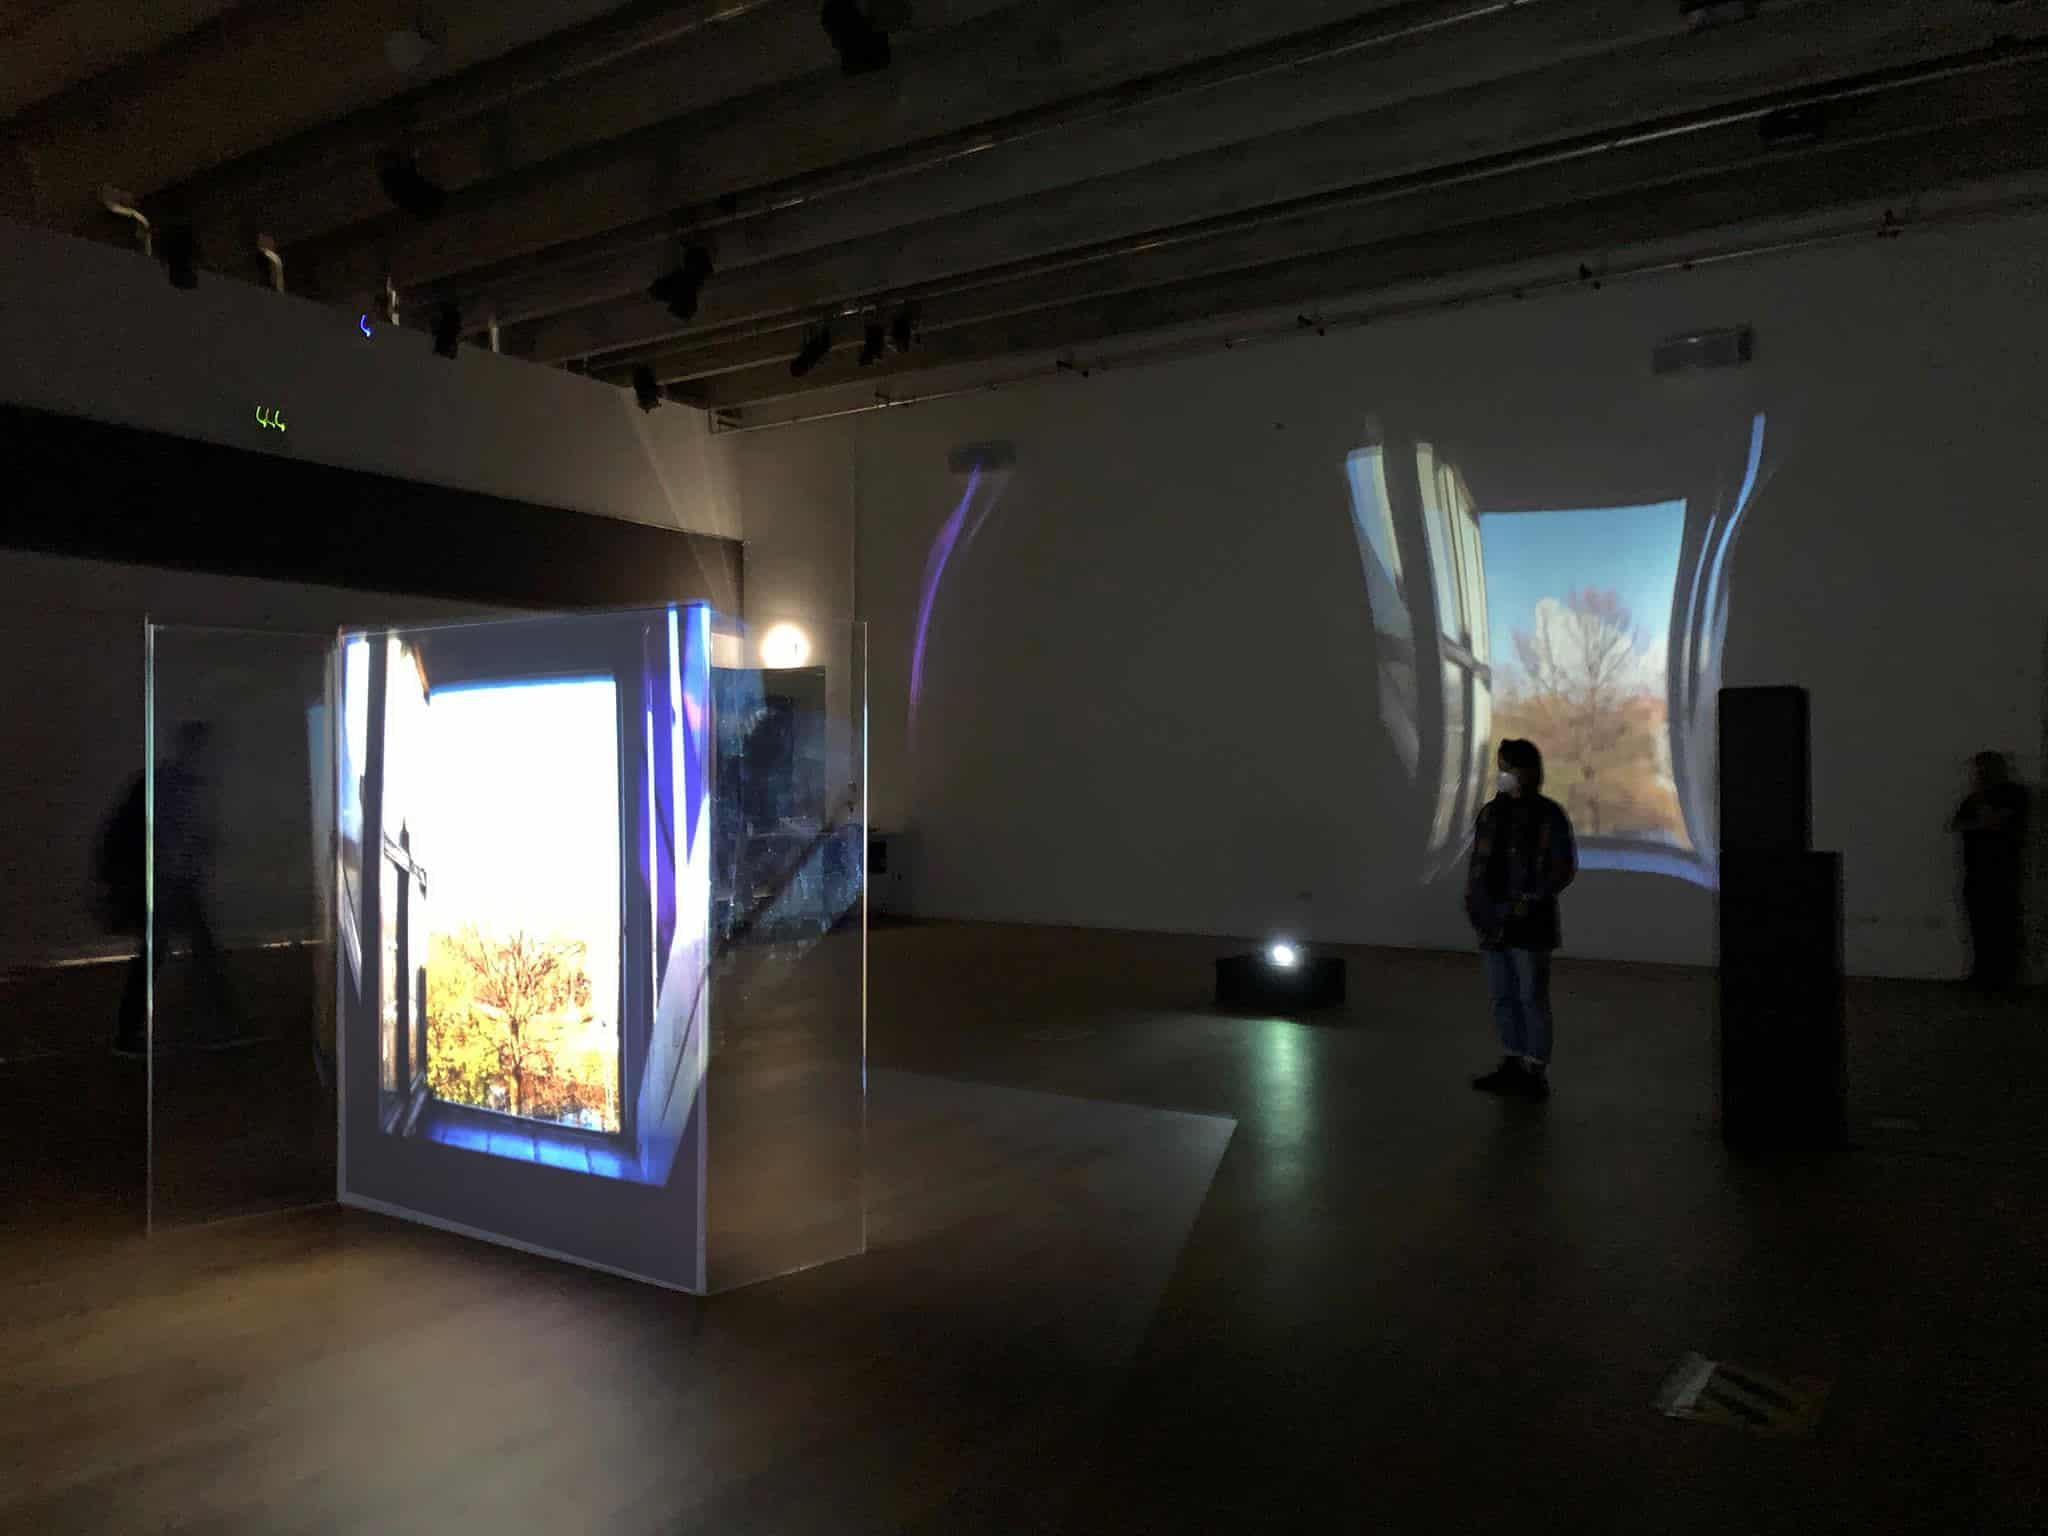 Gary Finnegan, Without buildings and houses - Installation/ digital video, 9m 28sec, 2021